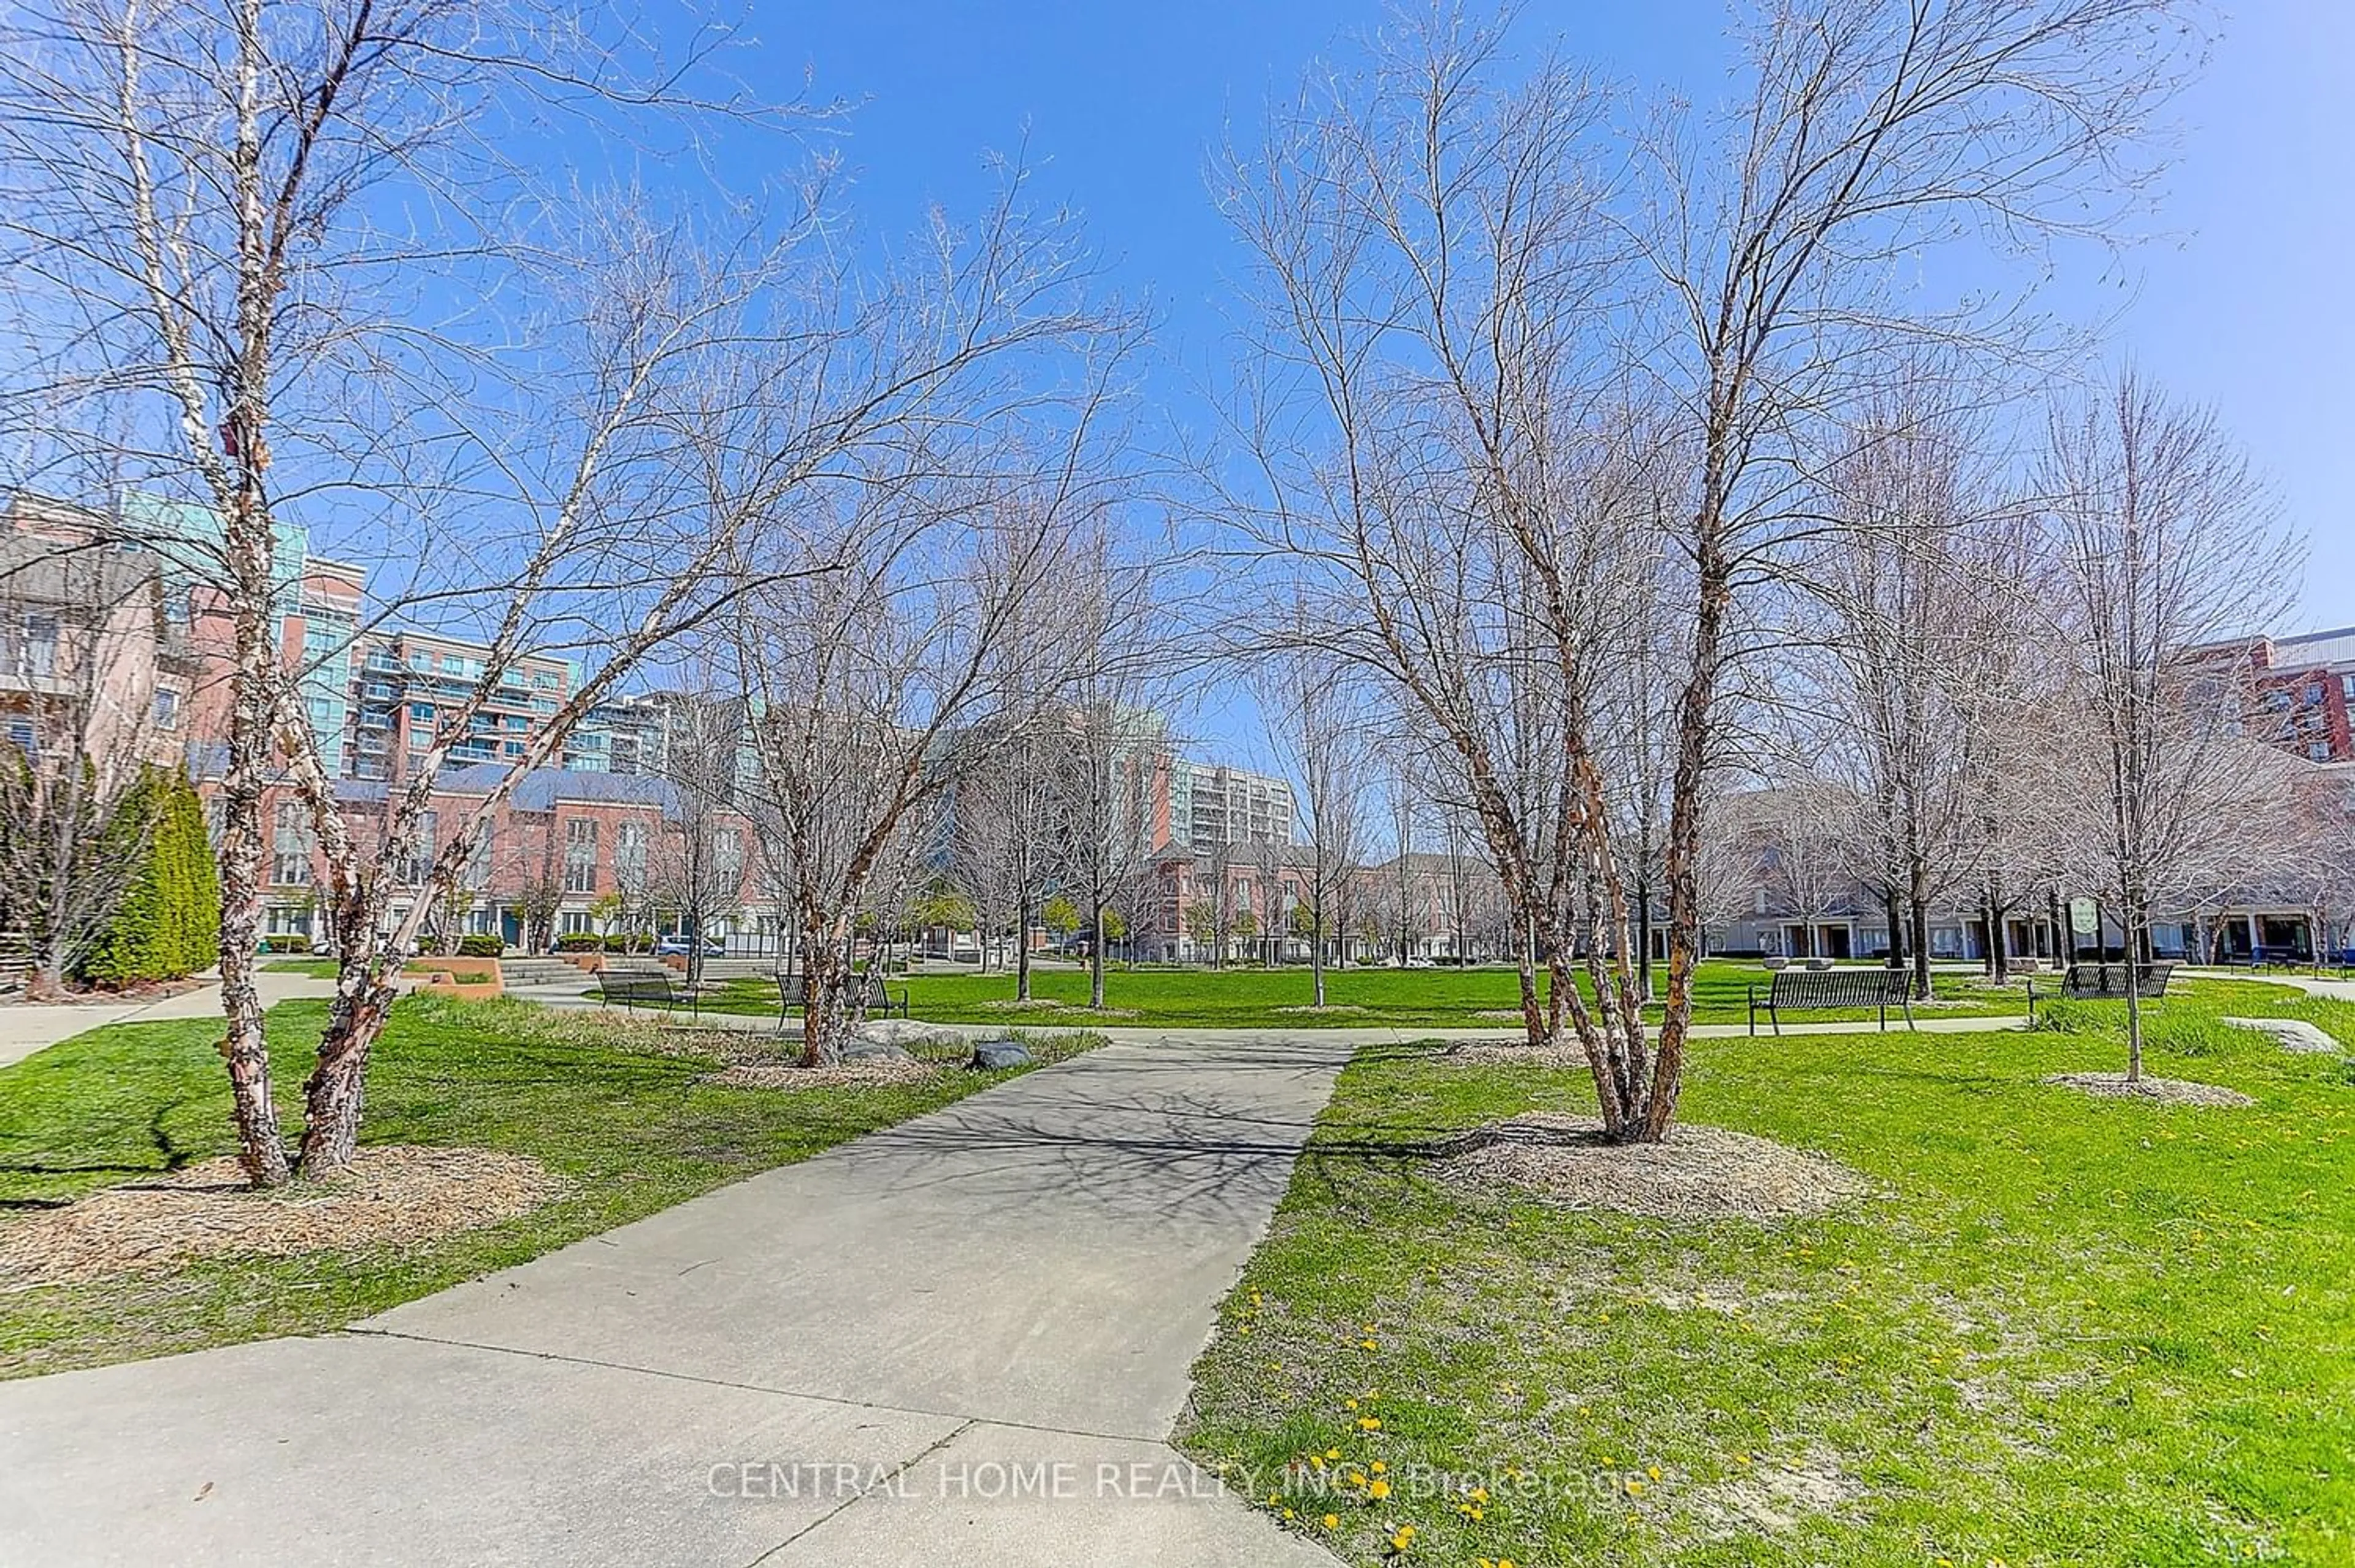 Street view for 21 Galleria Pkwy #21, Markham Ontario L3T 0A4